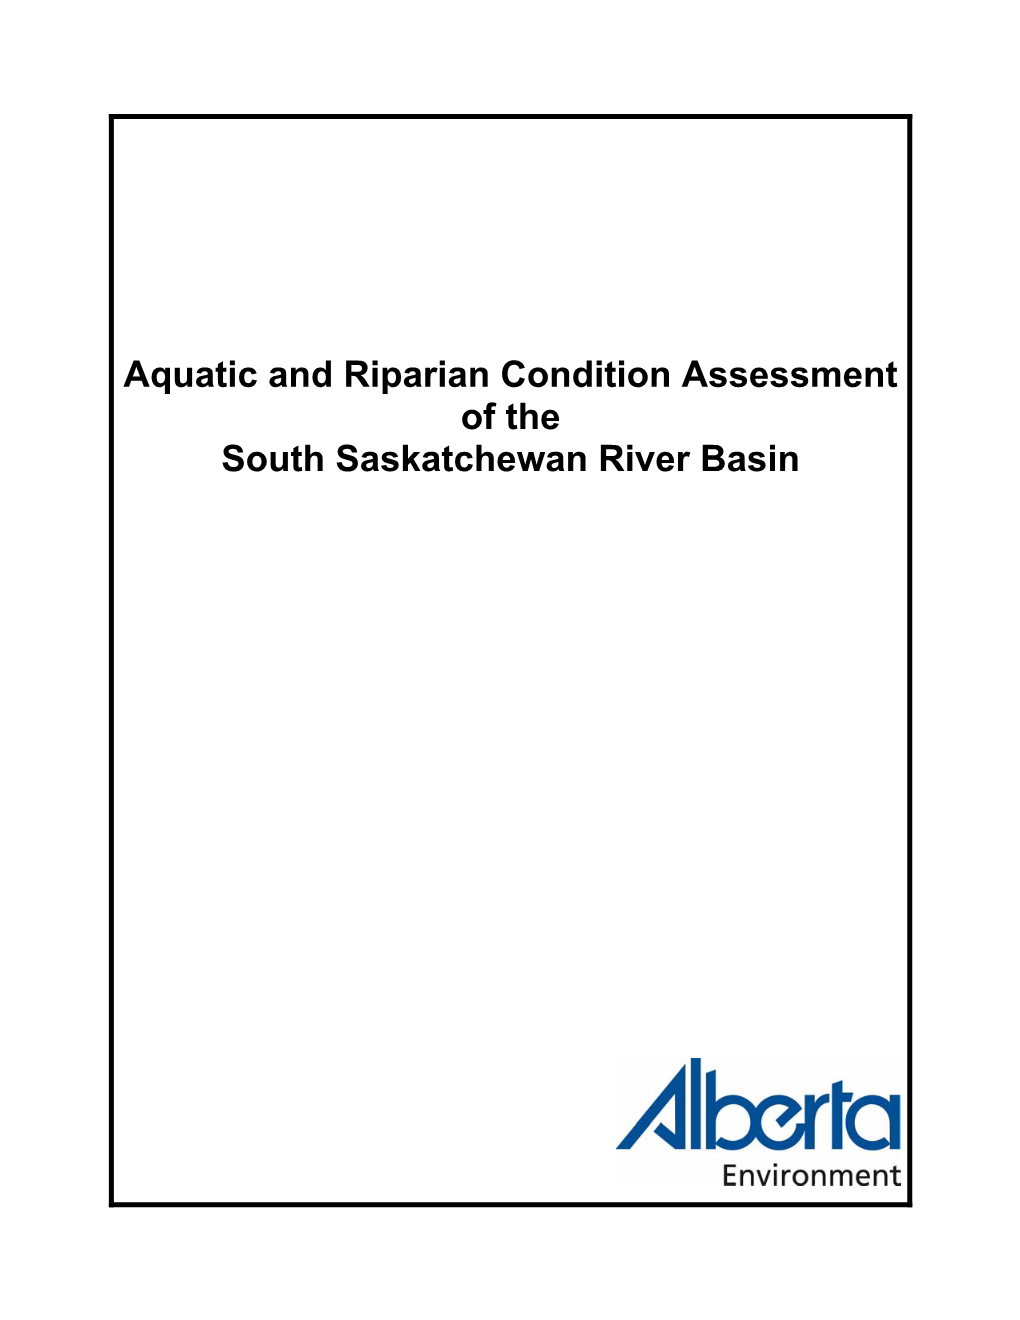 Aquatic and Riparian Condition Assessment of the South Saskatchewan River Basin